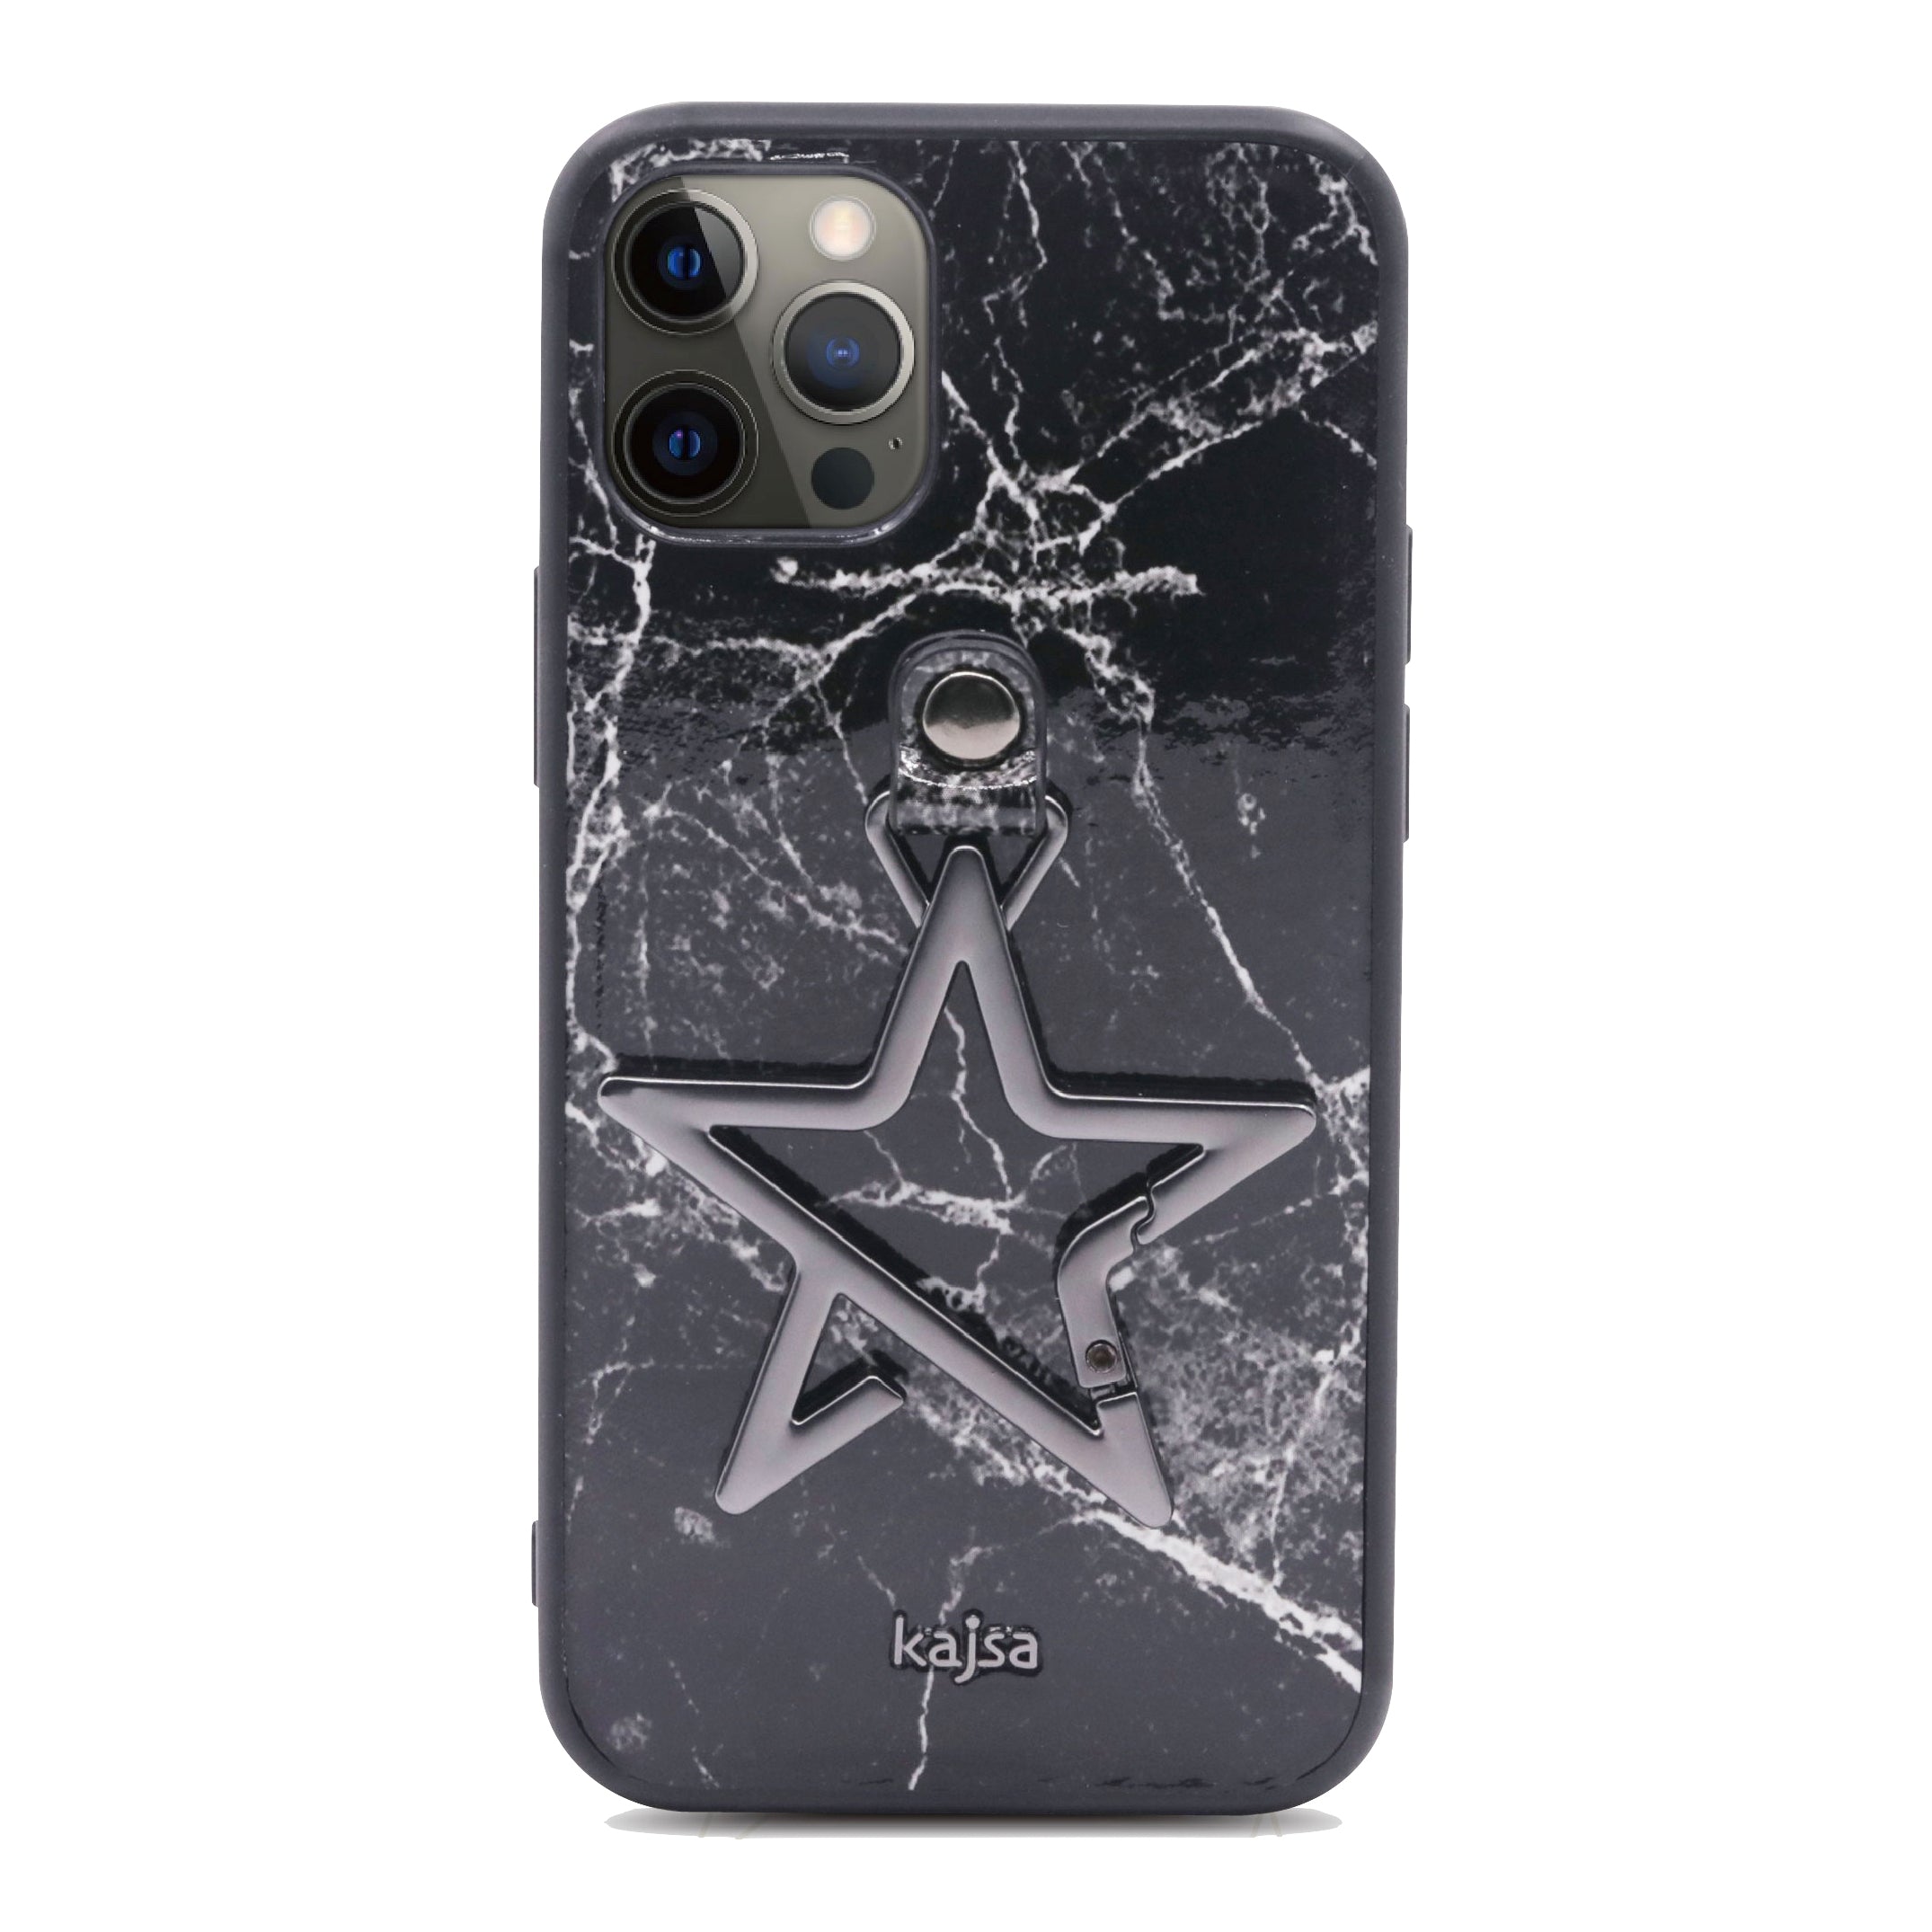 Starry Collection - Marble Pattern Back Case for iPhone 12-Phone Case- phone case - phone cases- phone cover- iphone cover- iphone case- iphone cases- leather case- leather cases- DIYCASE - custom case - leather cover - hand strap case - croco pattern case - snake pattern case - carbon fiber phone case - phone case brand - unique phone case - high quality - phone case brand - protective case - buy phone case hong kong - online buy phone case - iphone‎手機殼 - 客製化手機殼 - samsung ‎手機殼 - 香港手機殼 - 買電話殼